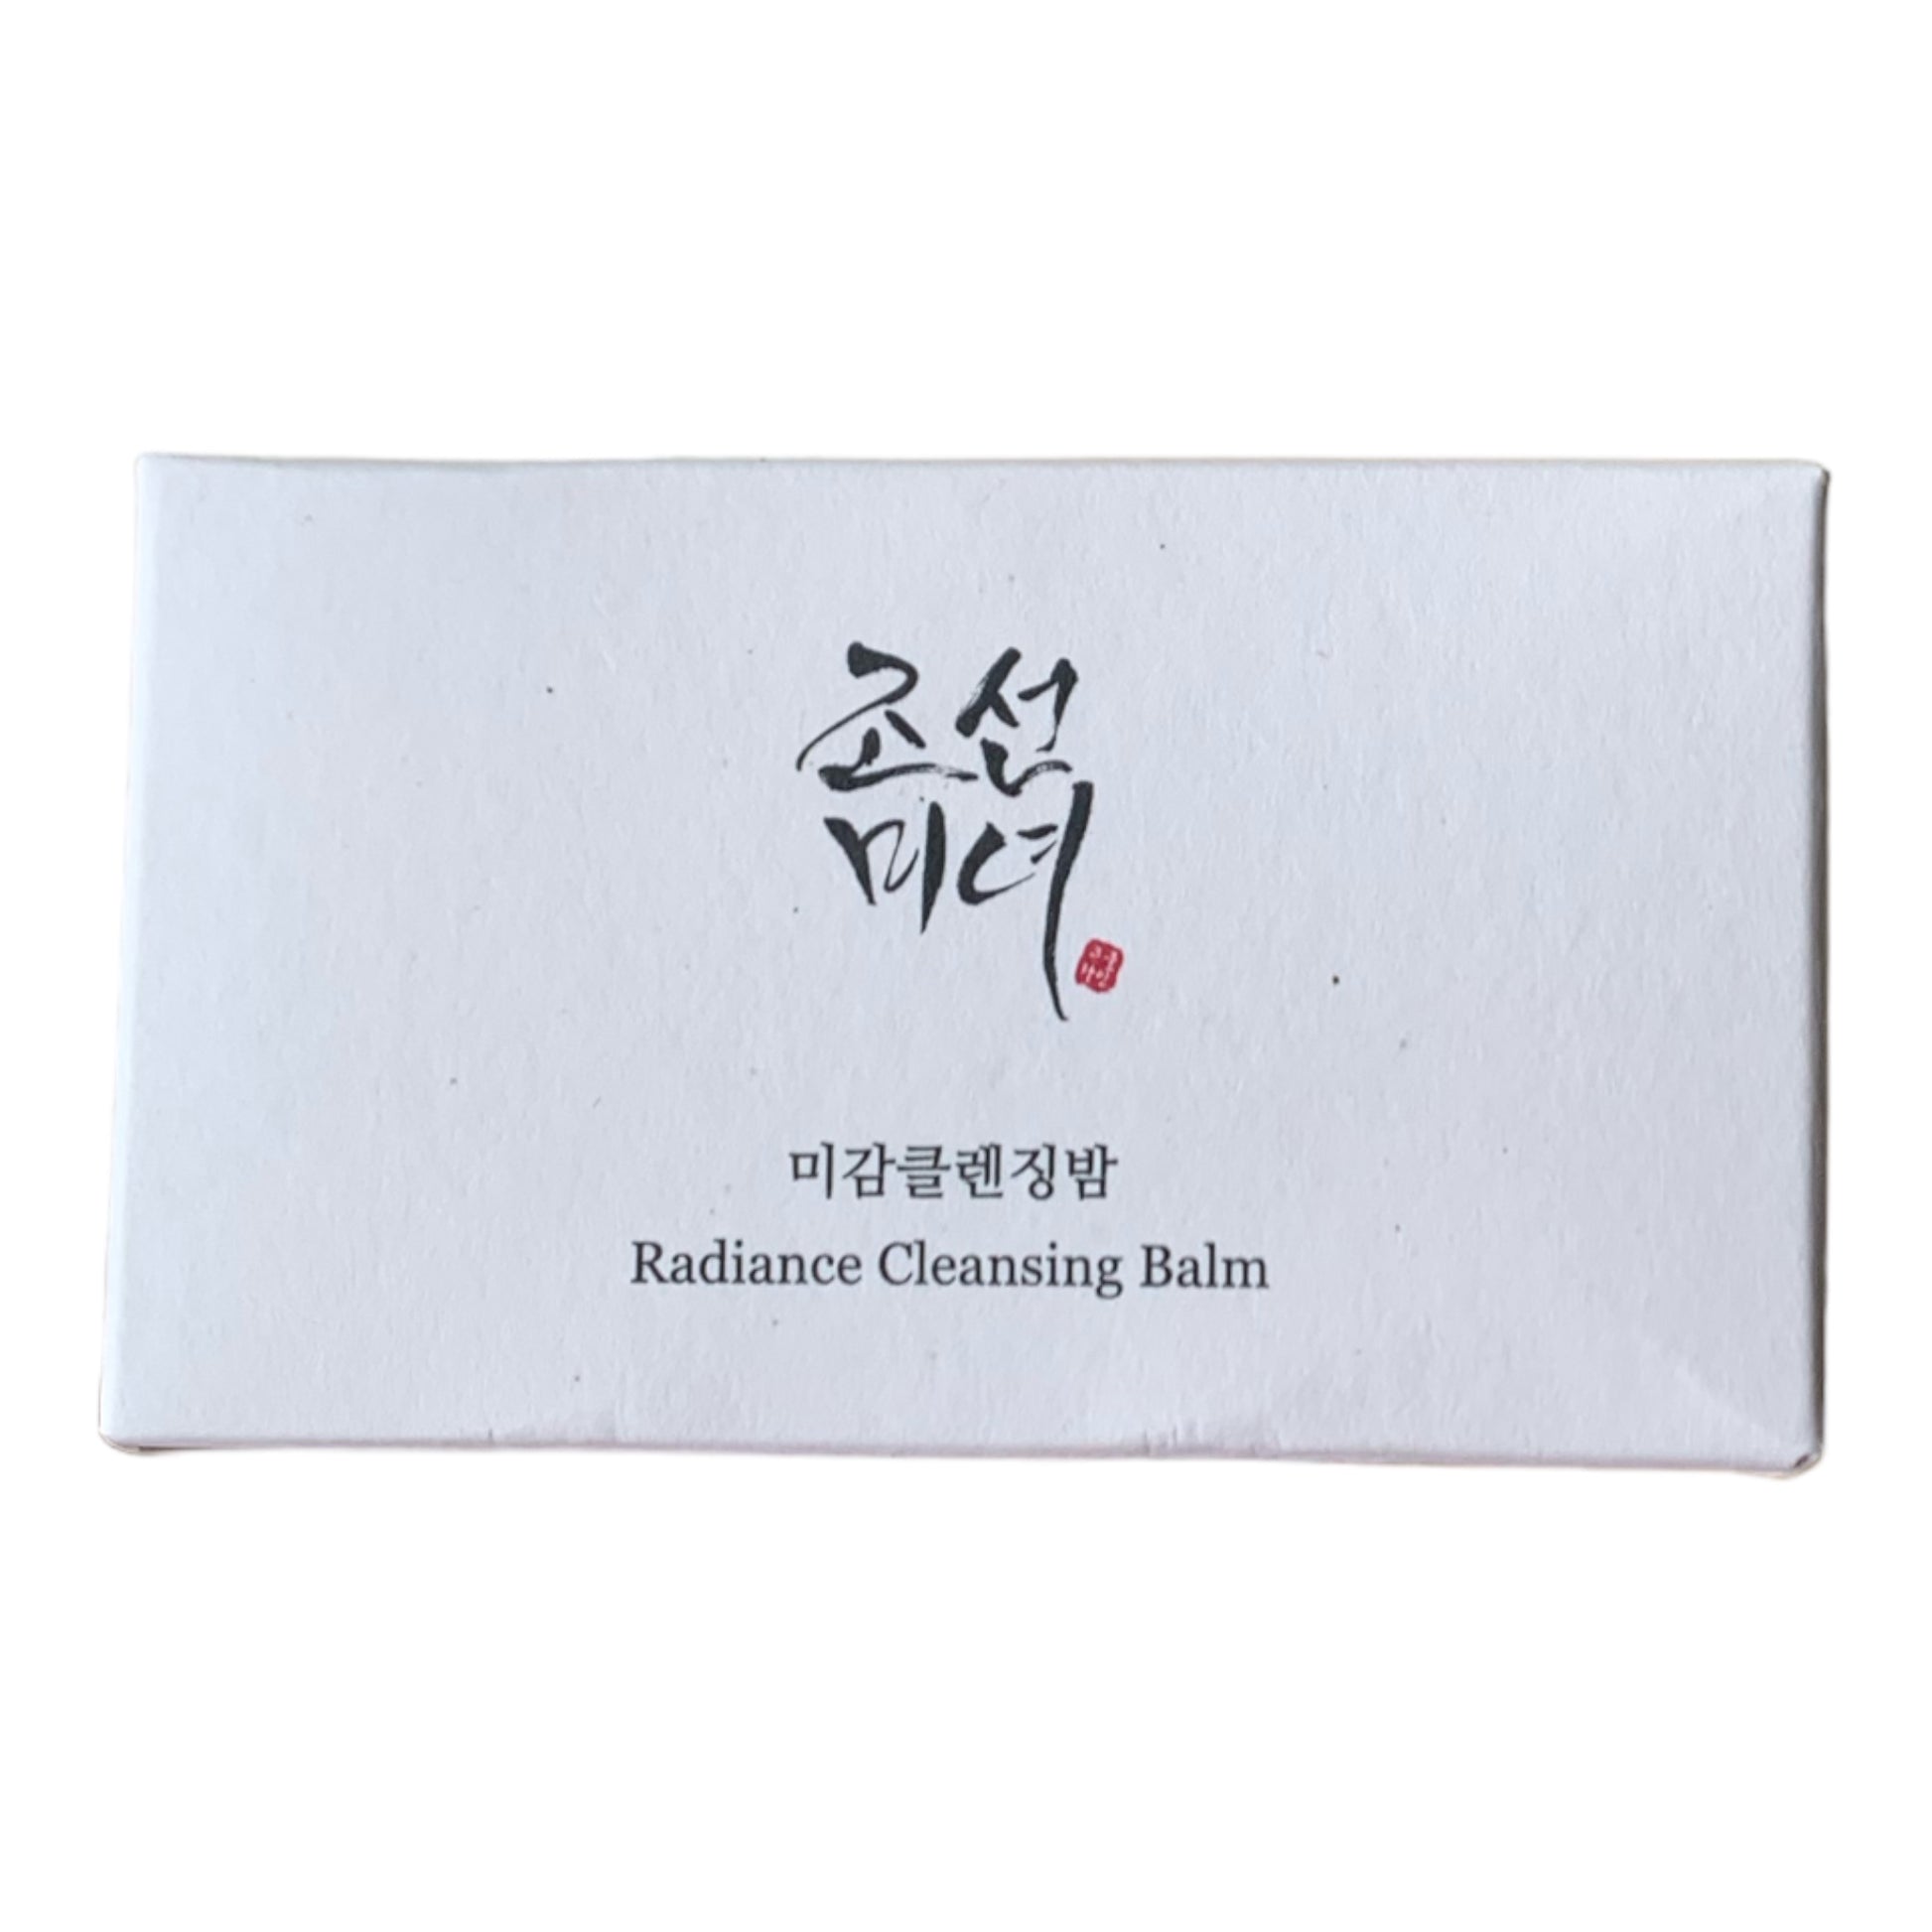 BEAUTY OF JOSEON - Radiance Cleansing Balm, Skin Care, Cleansing Sherbet, Wild Life Millions